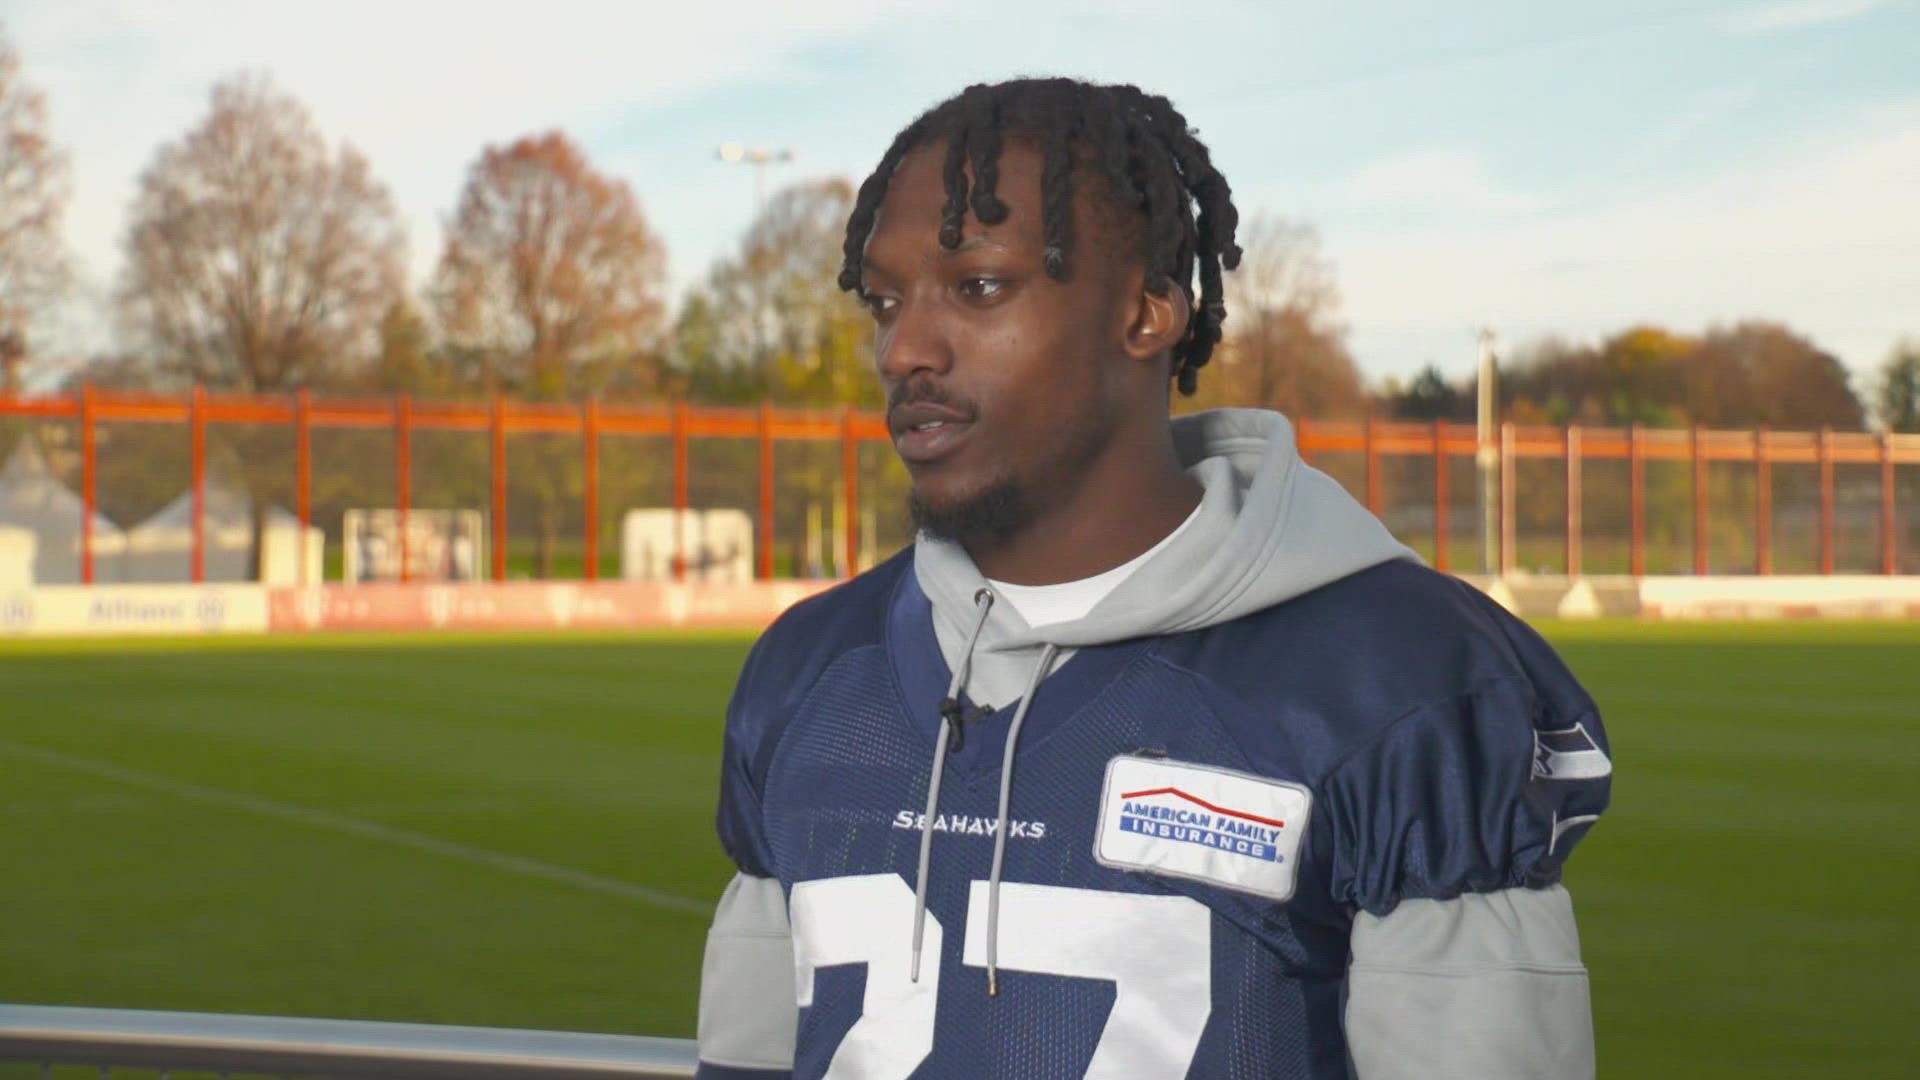 Tariq Woolen explains what he has liked about the Seahawks' trip to Germany this week, and his reaction to trying the local food in Munich.